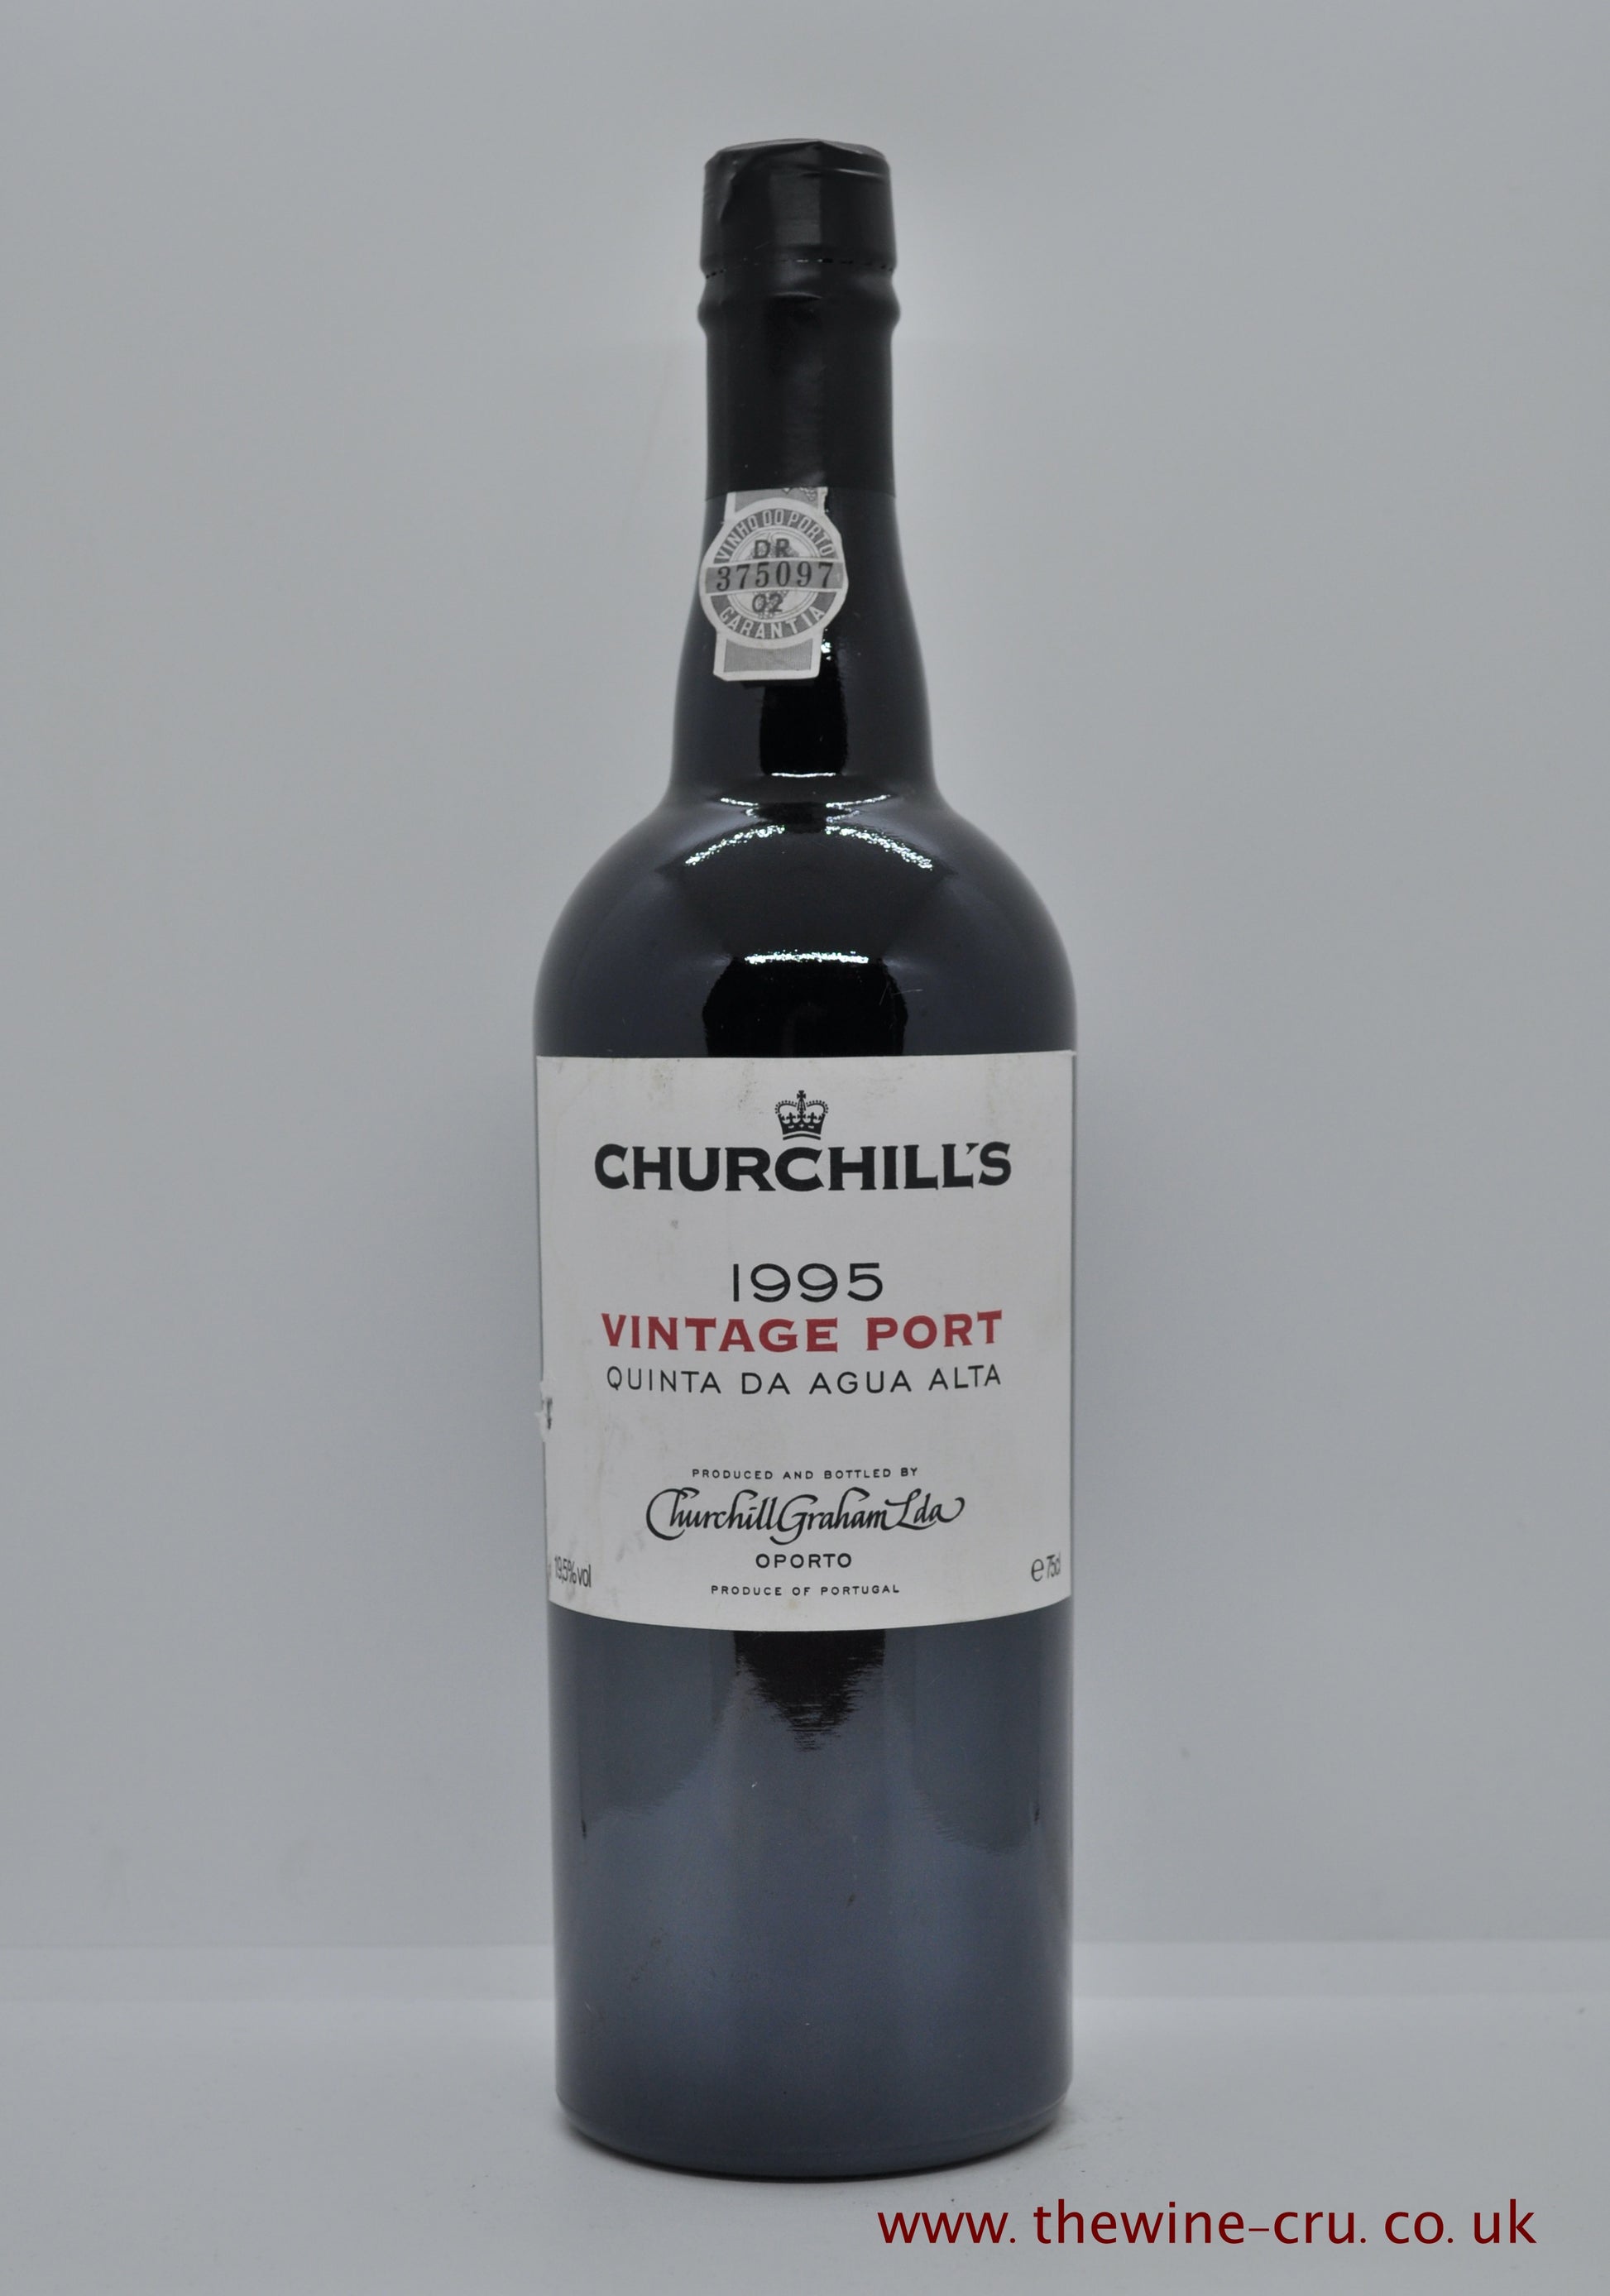 1995 vintage port wine. Churchills Vintage port Quinta Da Agua Alta 1995. Portugal. Immediate delivery. Free local delivery. Gift wrapping available